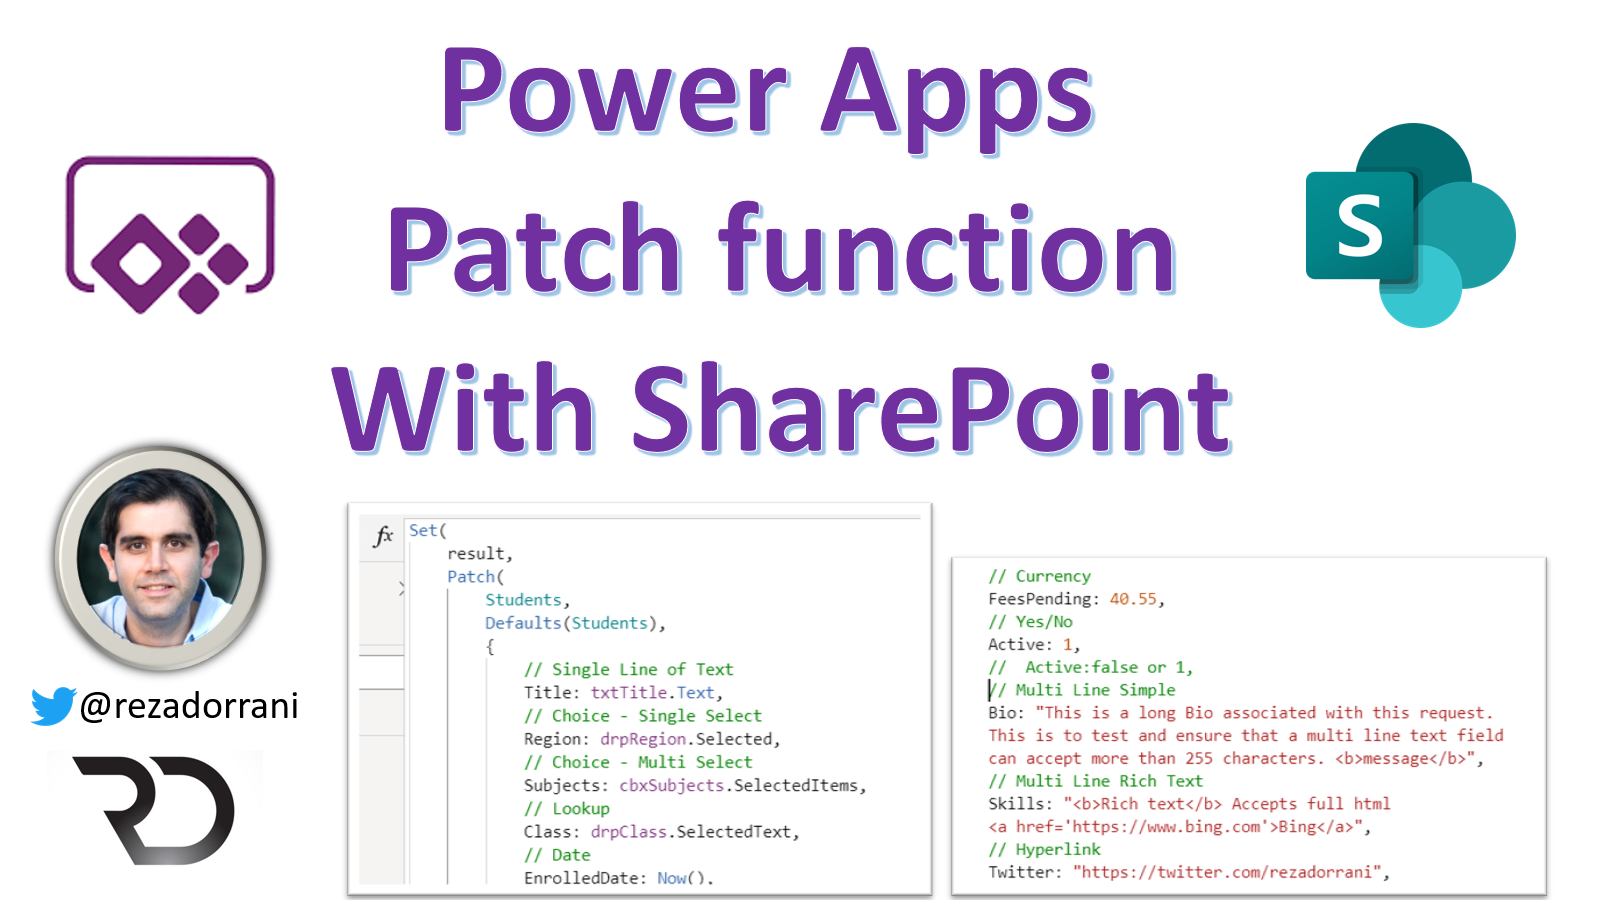 Power Apps Patch function with SharePoint